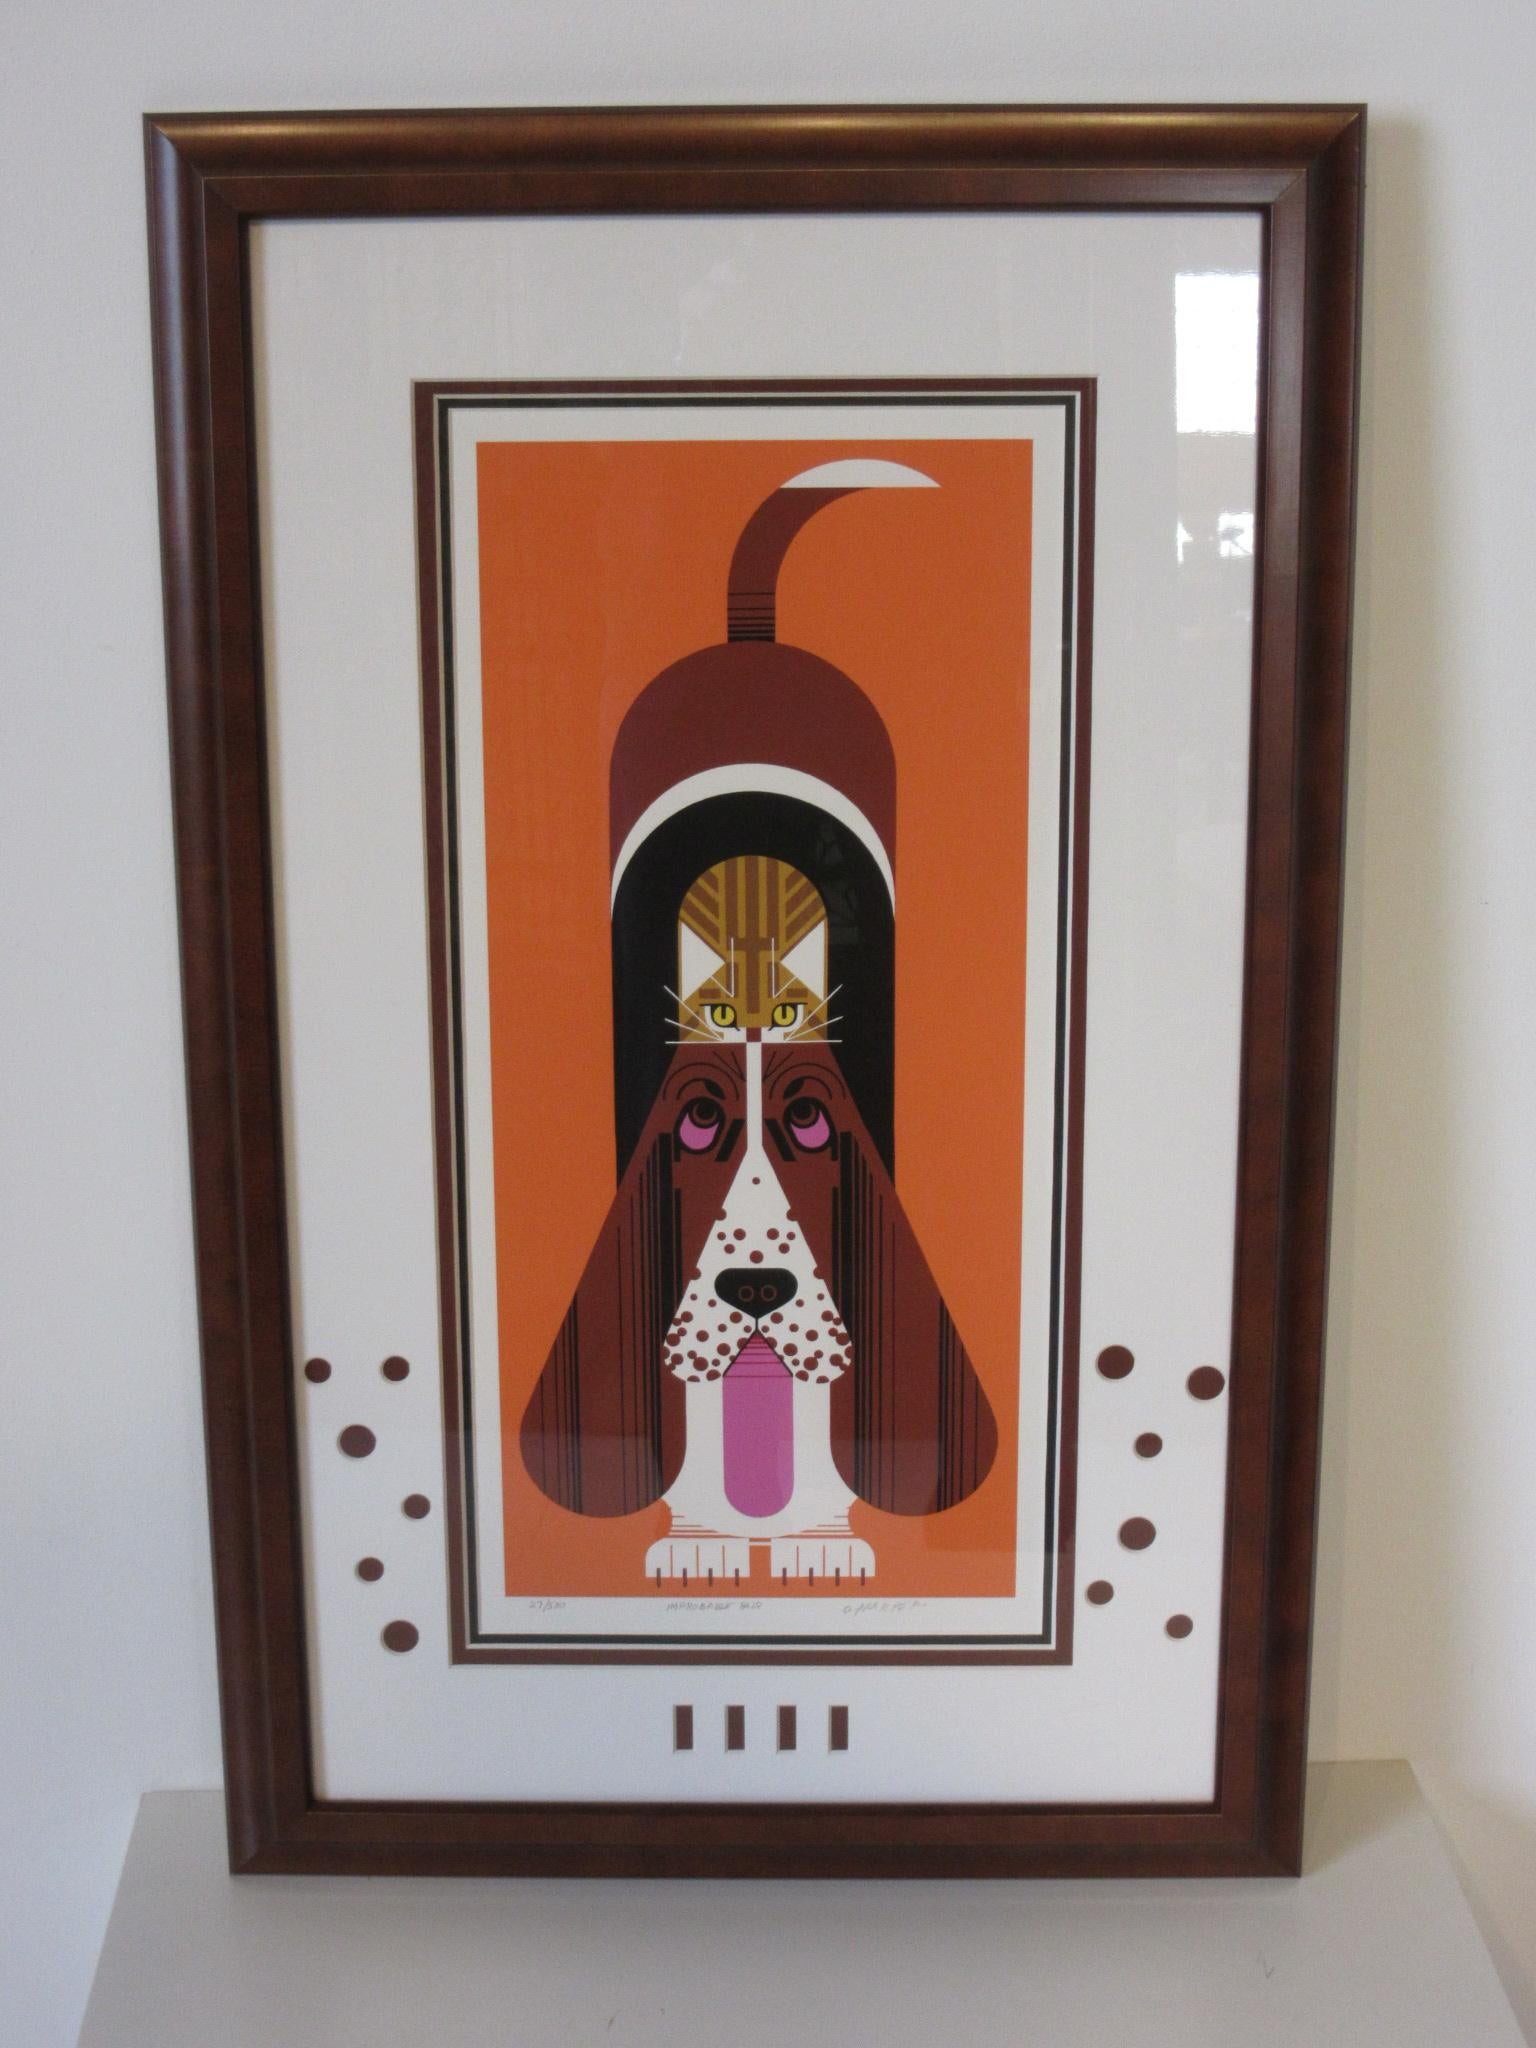 Charley Harper Midcentury Dog and Cat Serigraph Signed Limited Edition 1